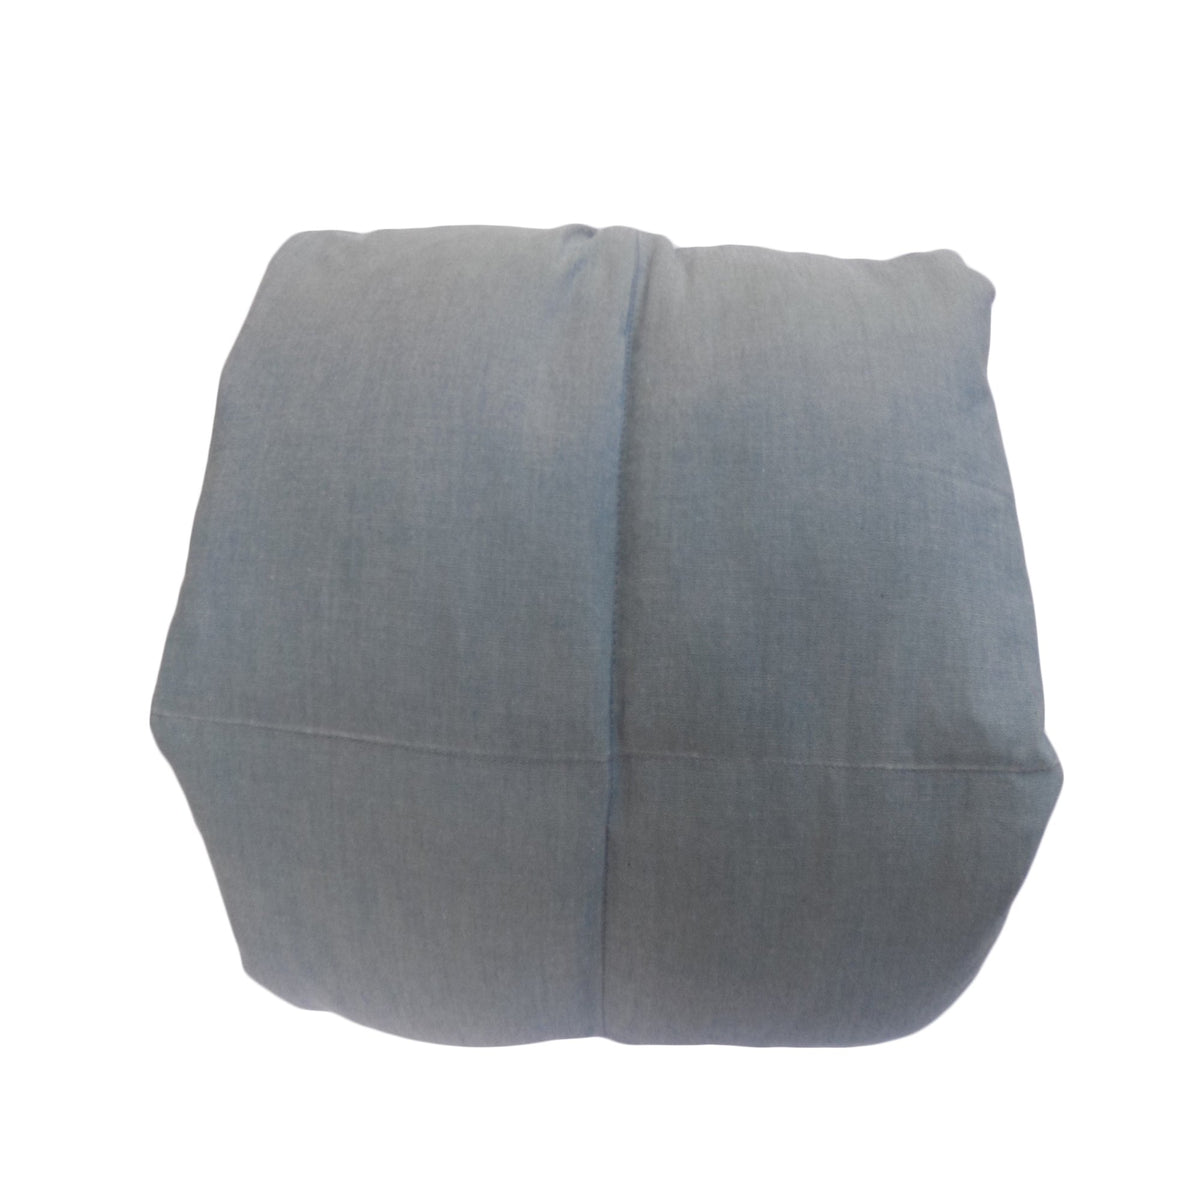 Comfy Chambray Weighted Blanket in Soft Light Blue Chambray Cotton ...